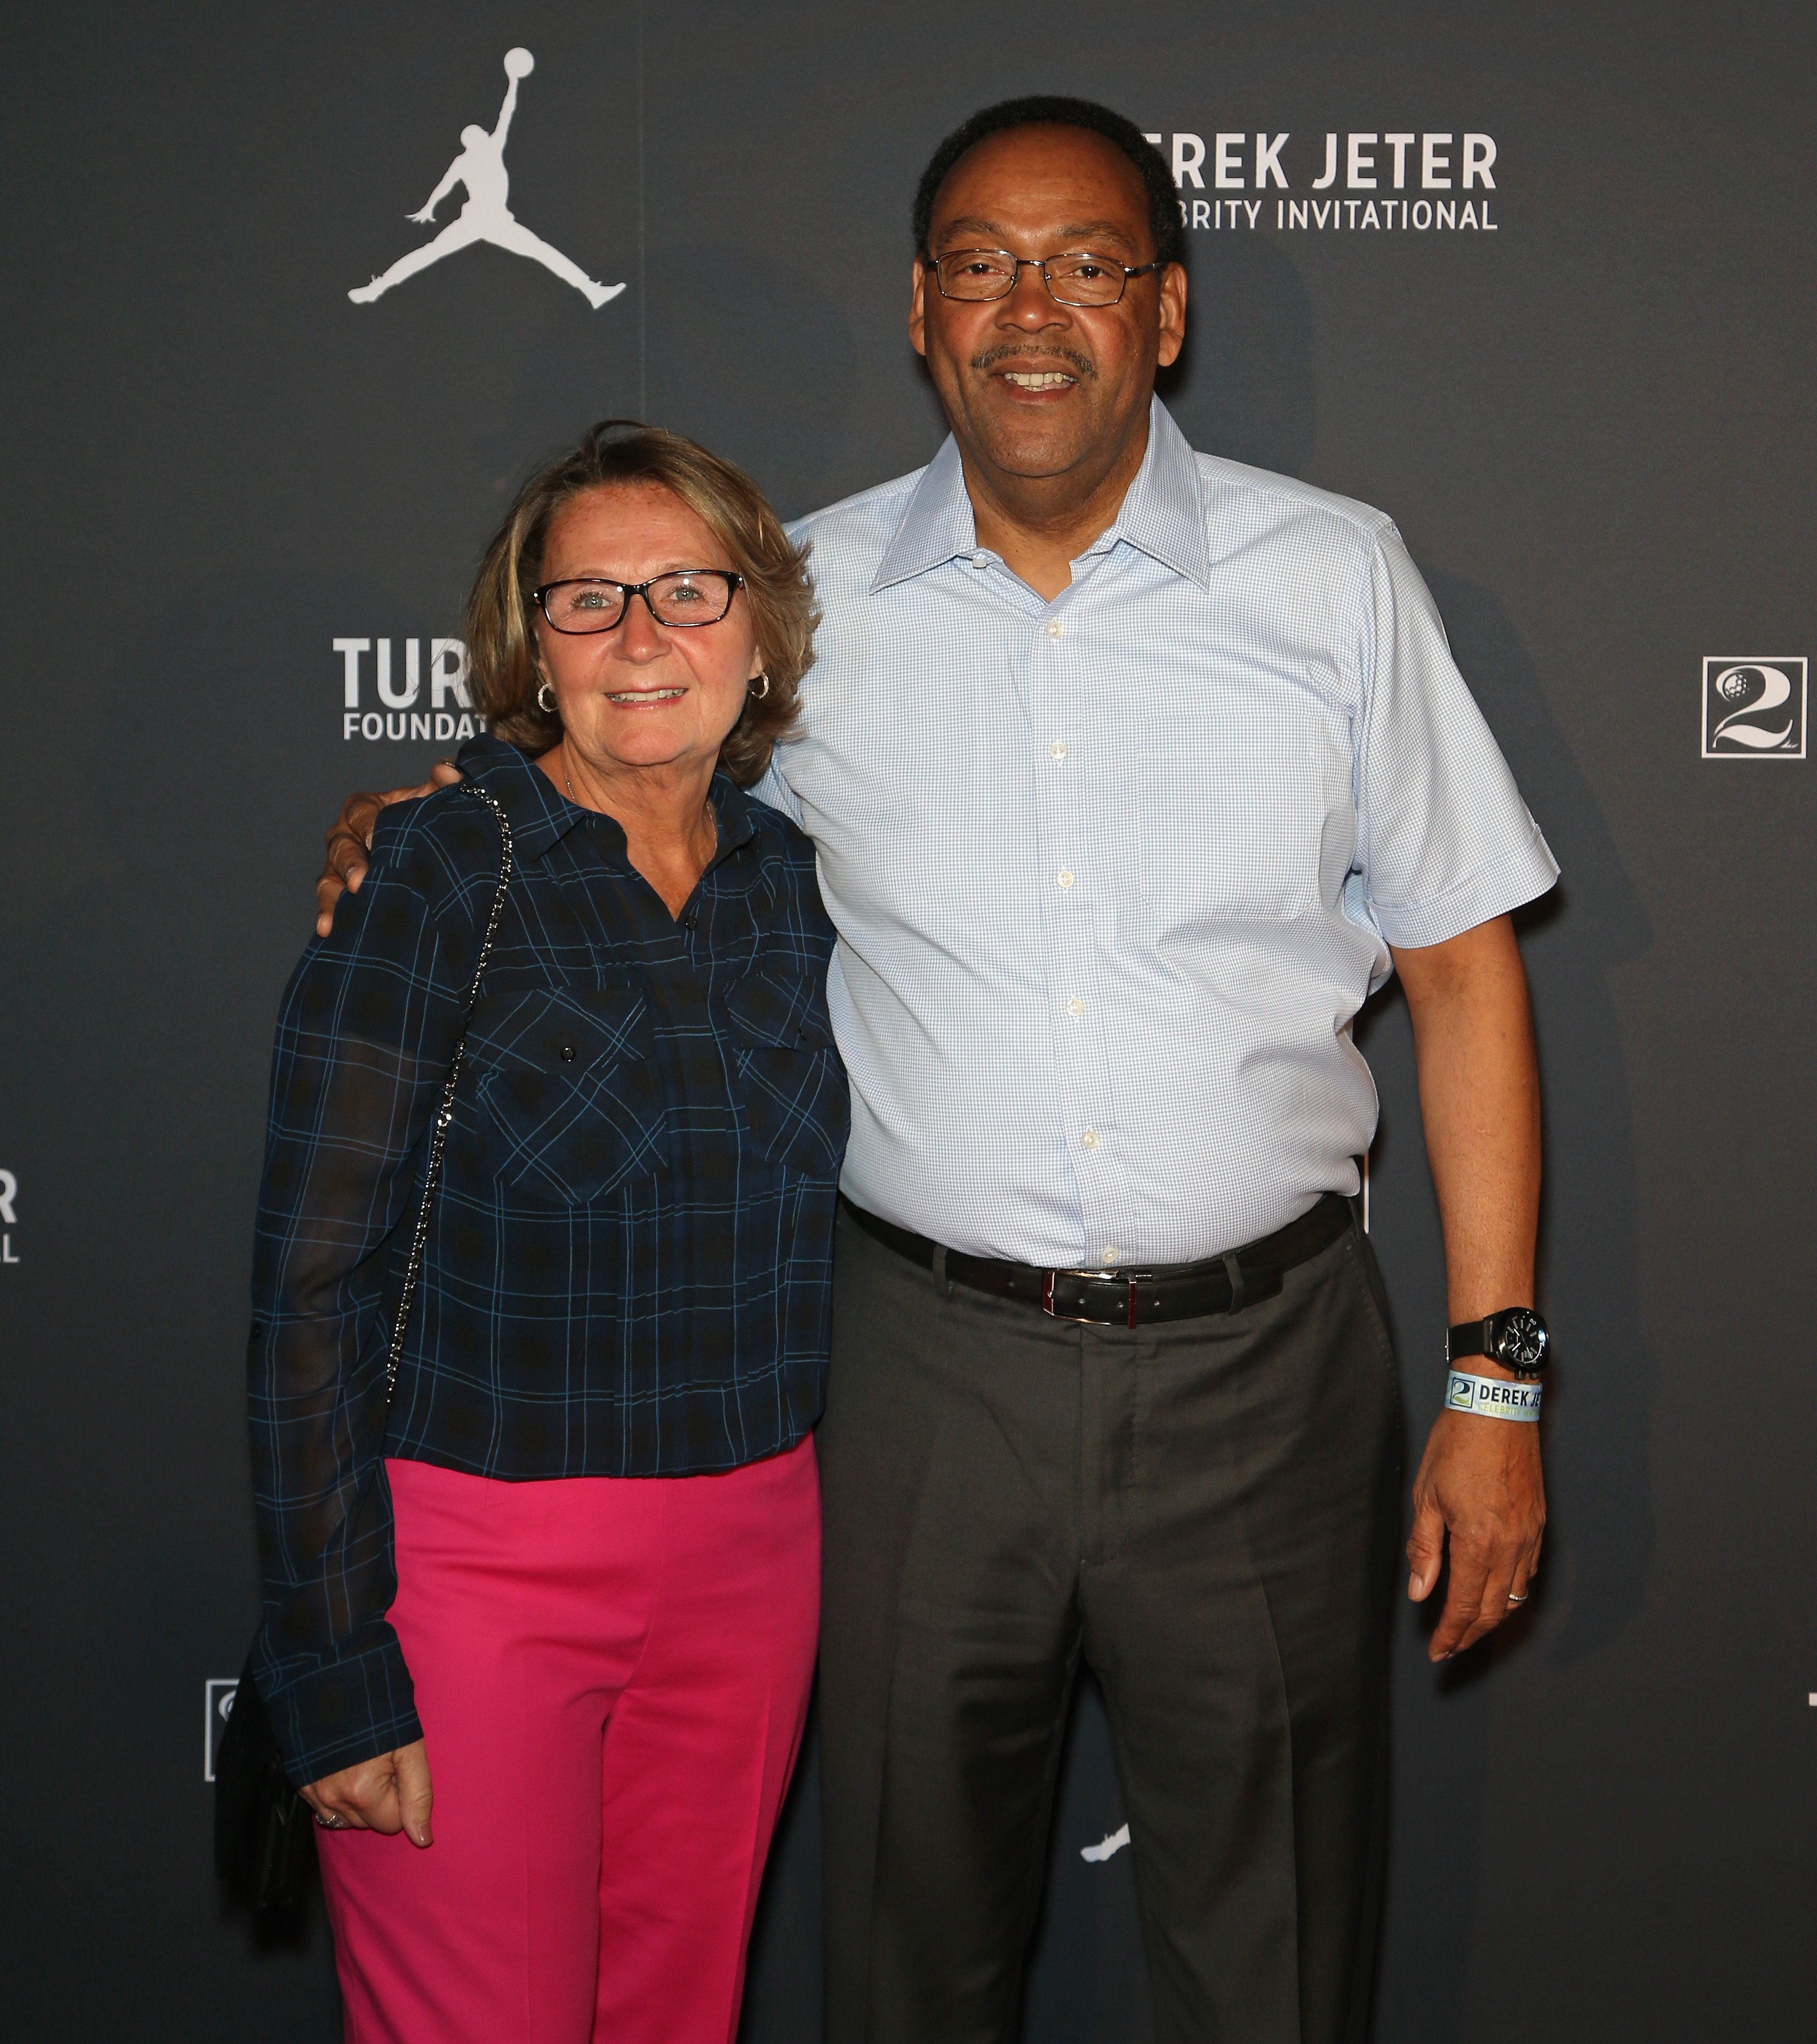 Dorothy Jeter and her husband Charles Jeter attend the Liquid Pool Lounge for Derek Jeter's Celebrity Invitational event at Aria Resort & Casino on April 20, 2016, in Las Vegas, Nevada. | Source: Getty Images